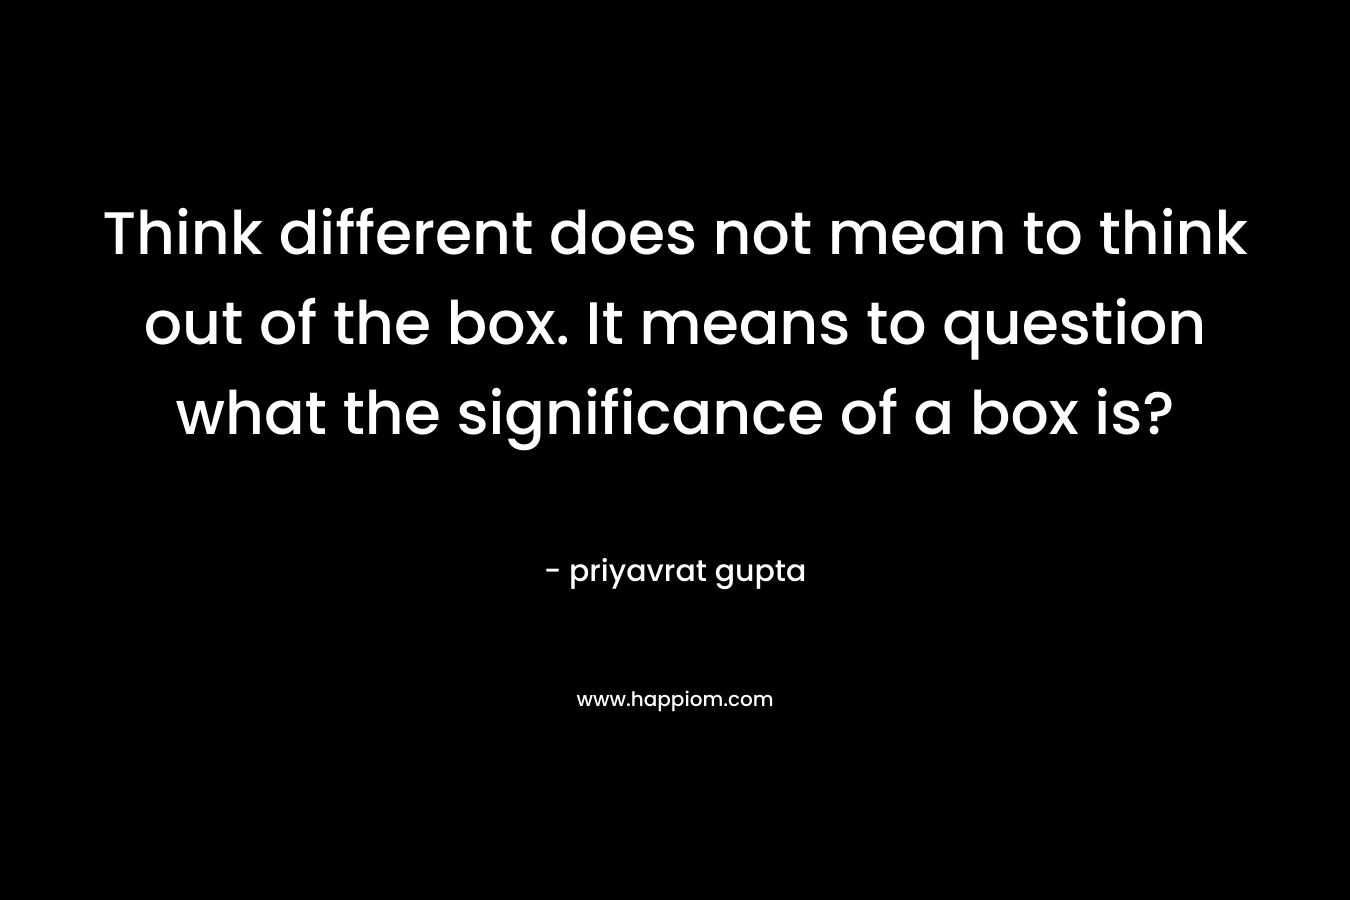 Think different does not mean to think out of the box. It means to question what the significance of a box is?